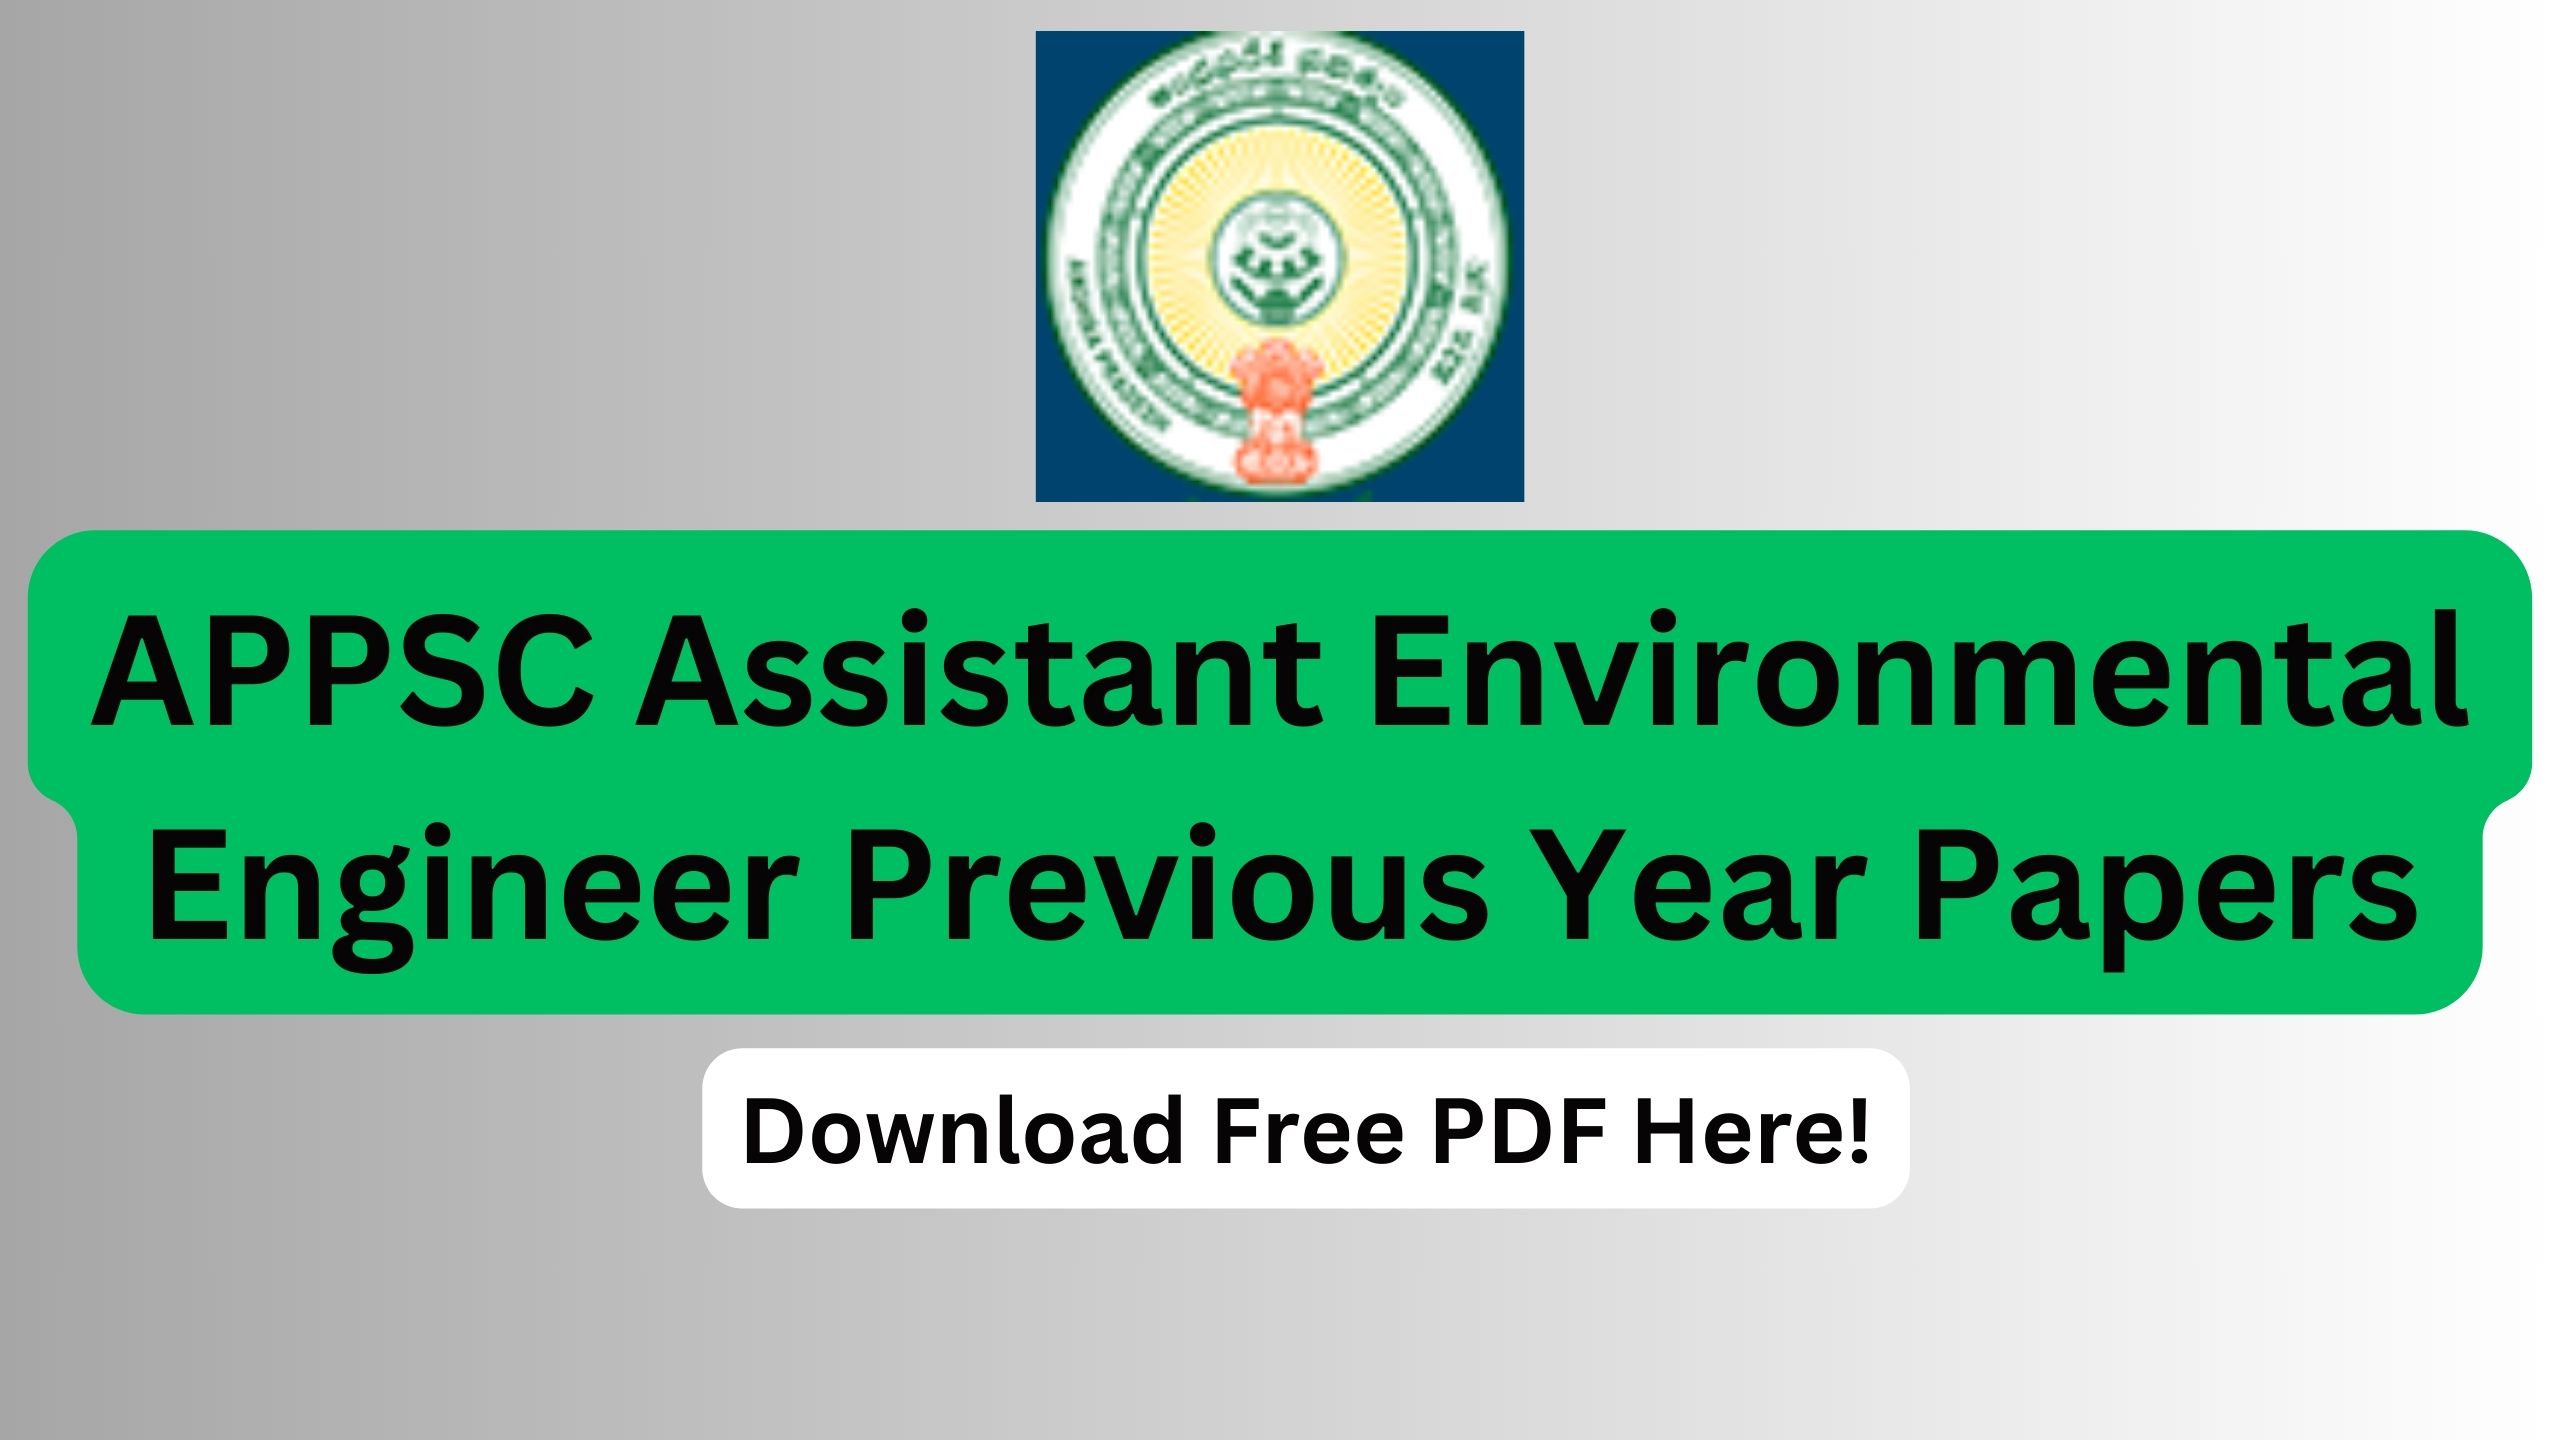 APPSC AEE Previous Year Papers